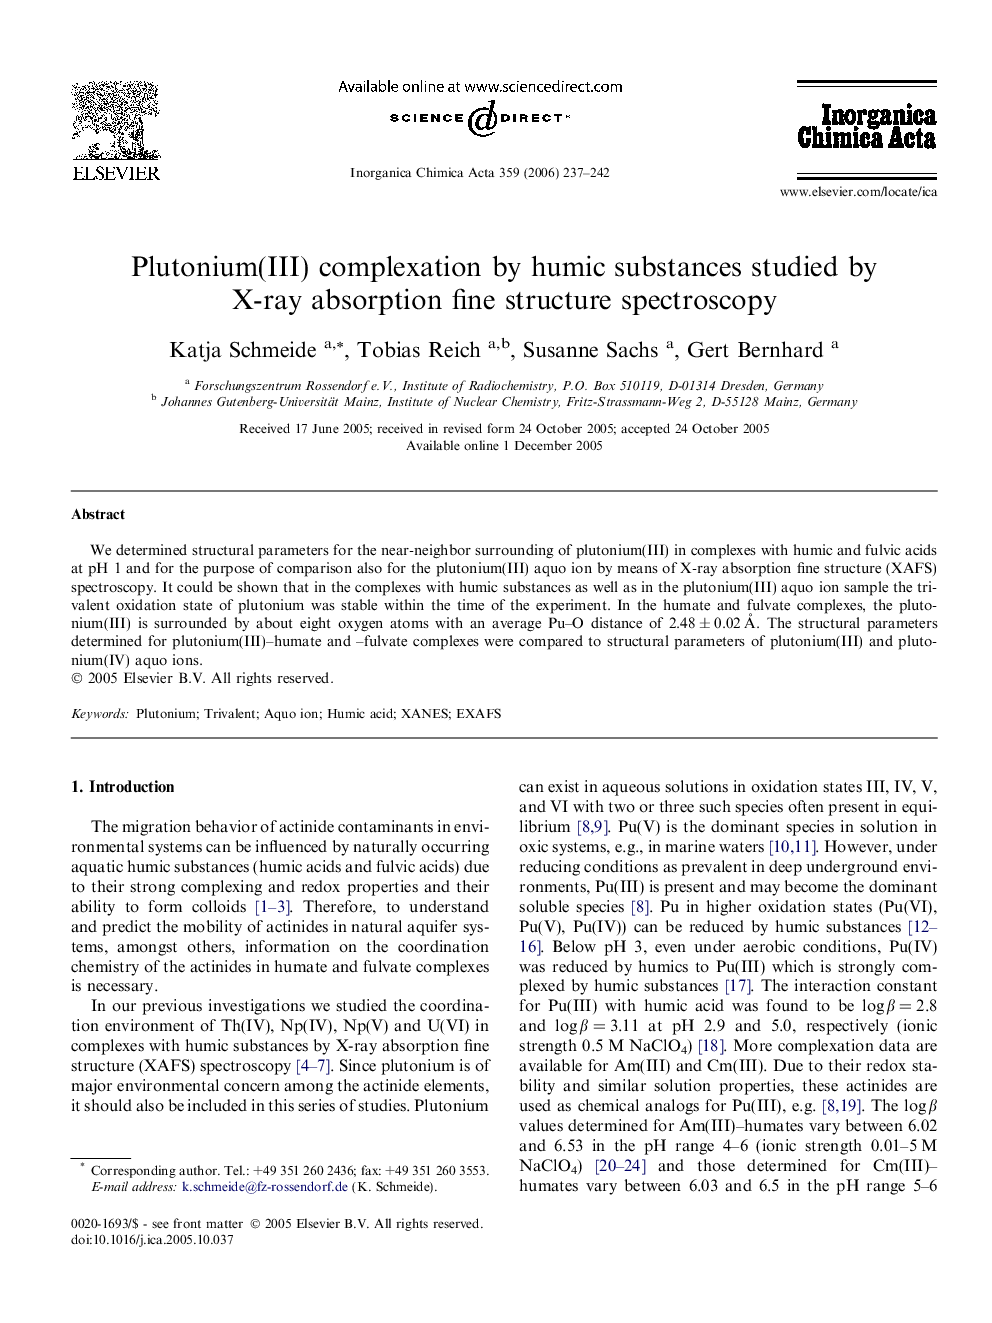 Plutonium(III) complexation by humic substances studied by X-ray absorption fine structure spectroscopy